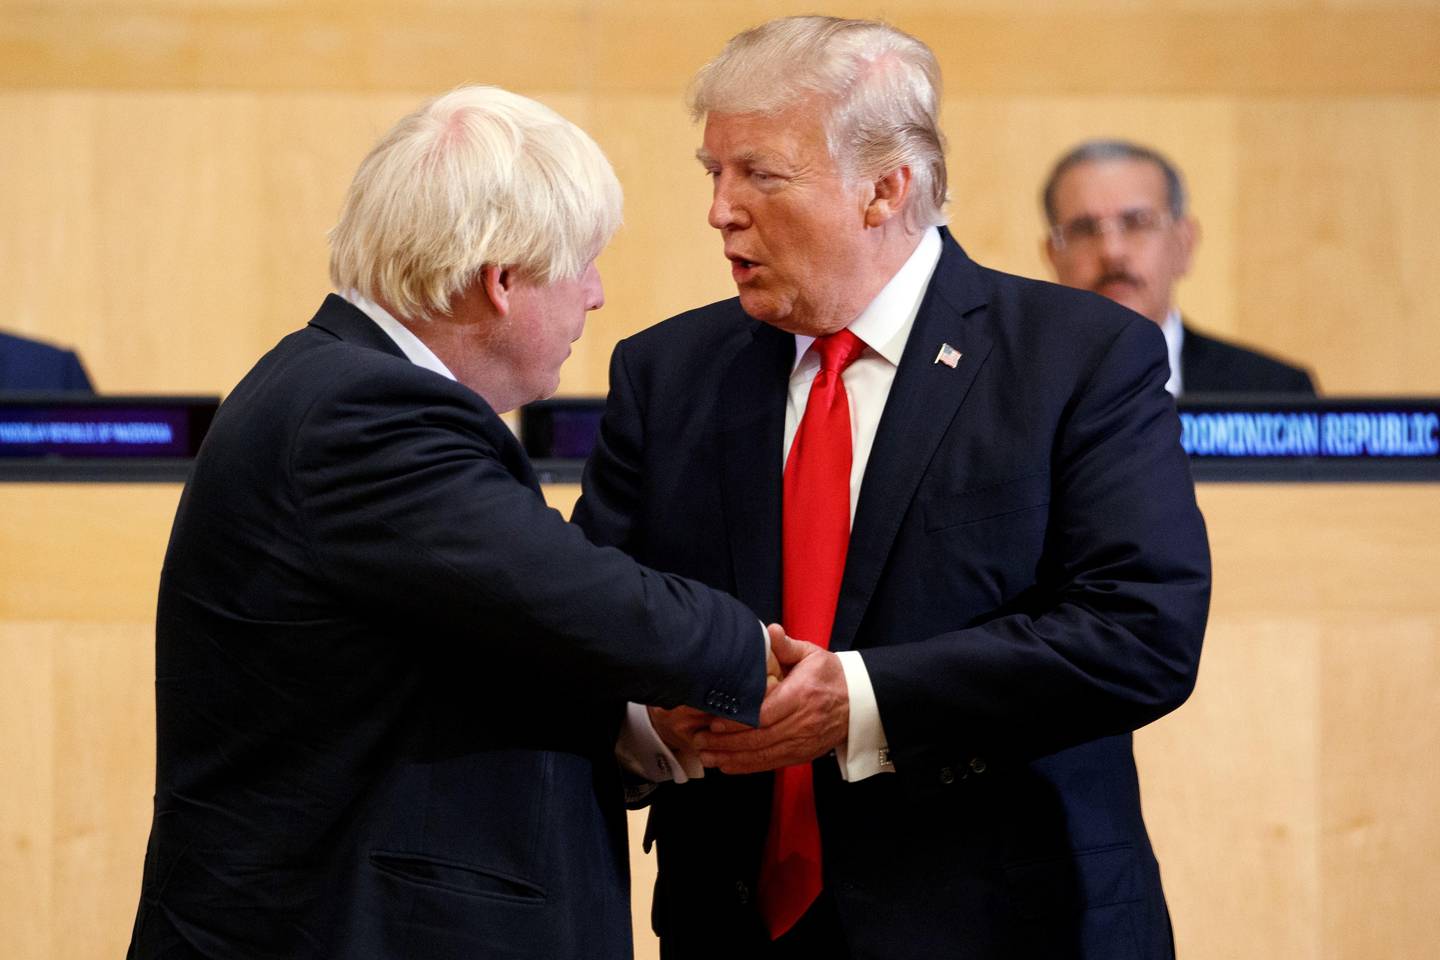 President Donald Trump shakes hands with British Foreign Secretary Boris Johnson during the "Reforming the United Nations: Management, Security, and Development" meeting during the United Nations General Assembly, Monday, Sept. 18, 2017, in New York. (AP Photo/Evan Vucci)